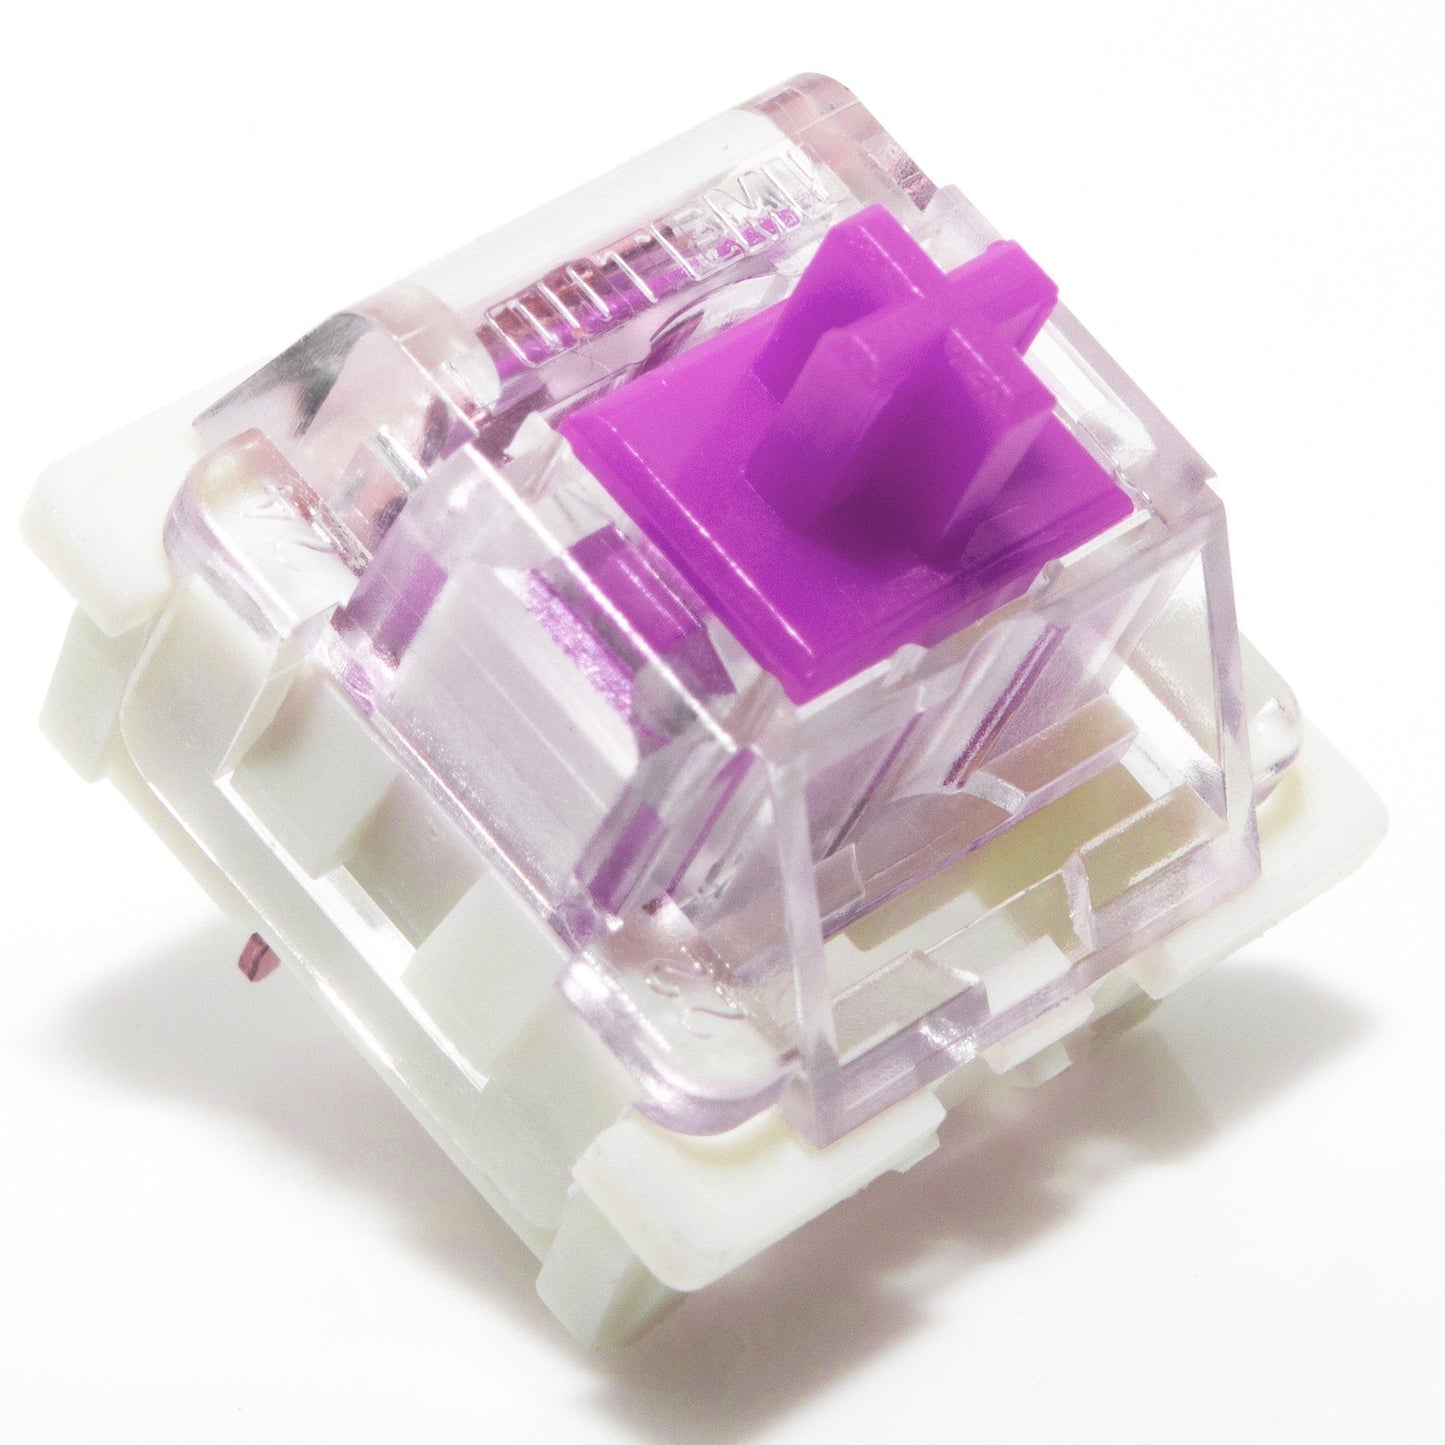 Outemu Linear Tactile Clickly SMD Mechanical Keyboard Switch Cherry MX Replacement Switches OUTMEU Purple  